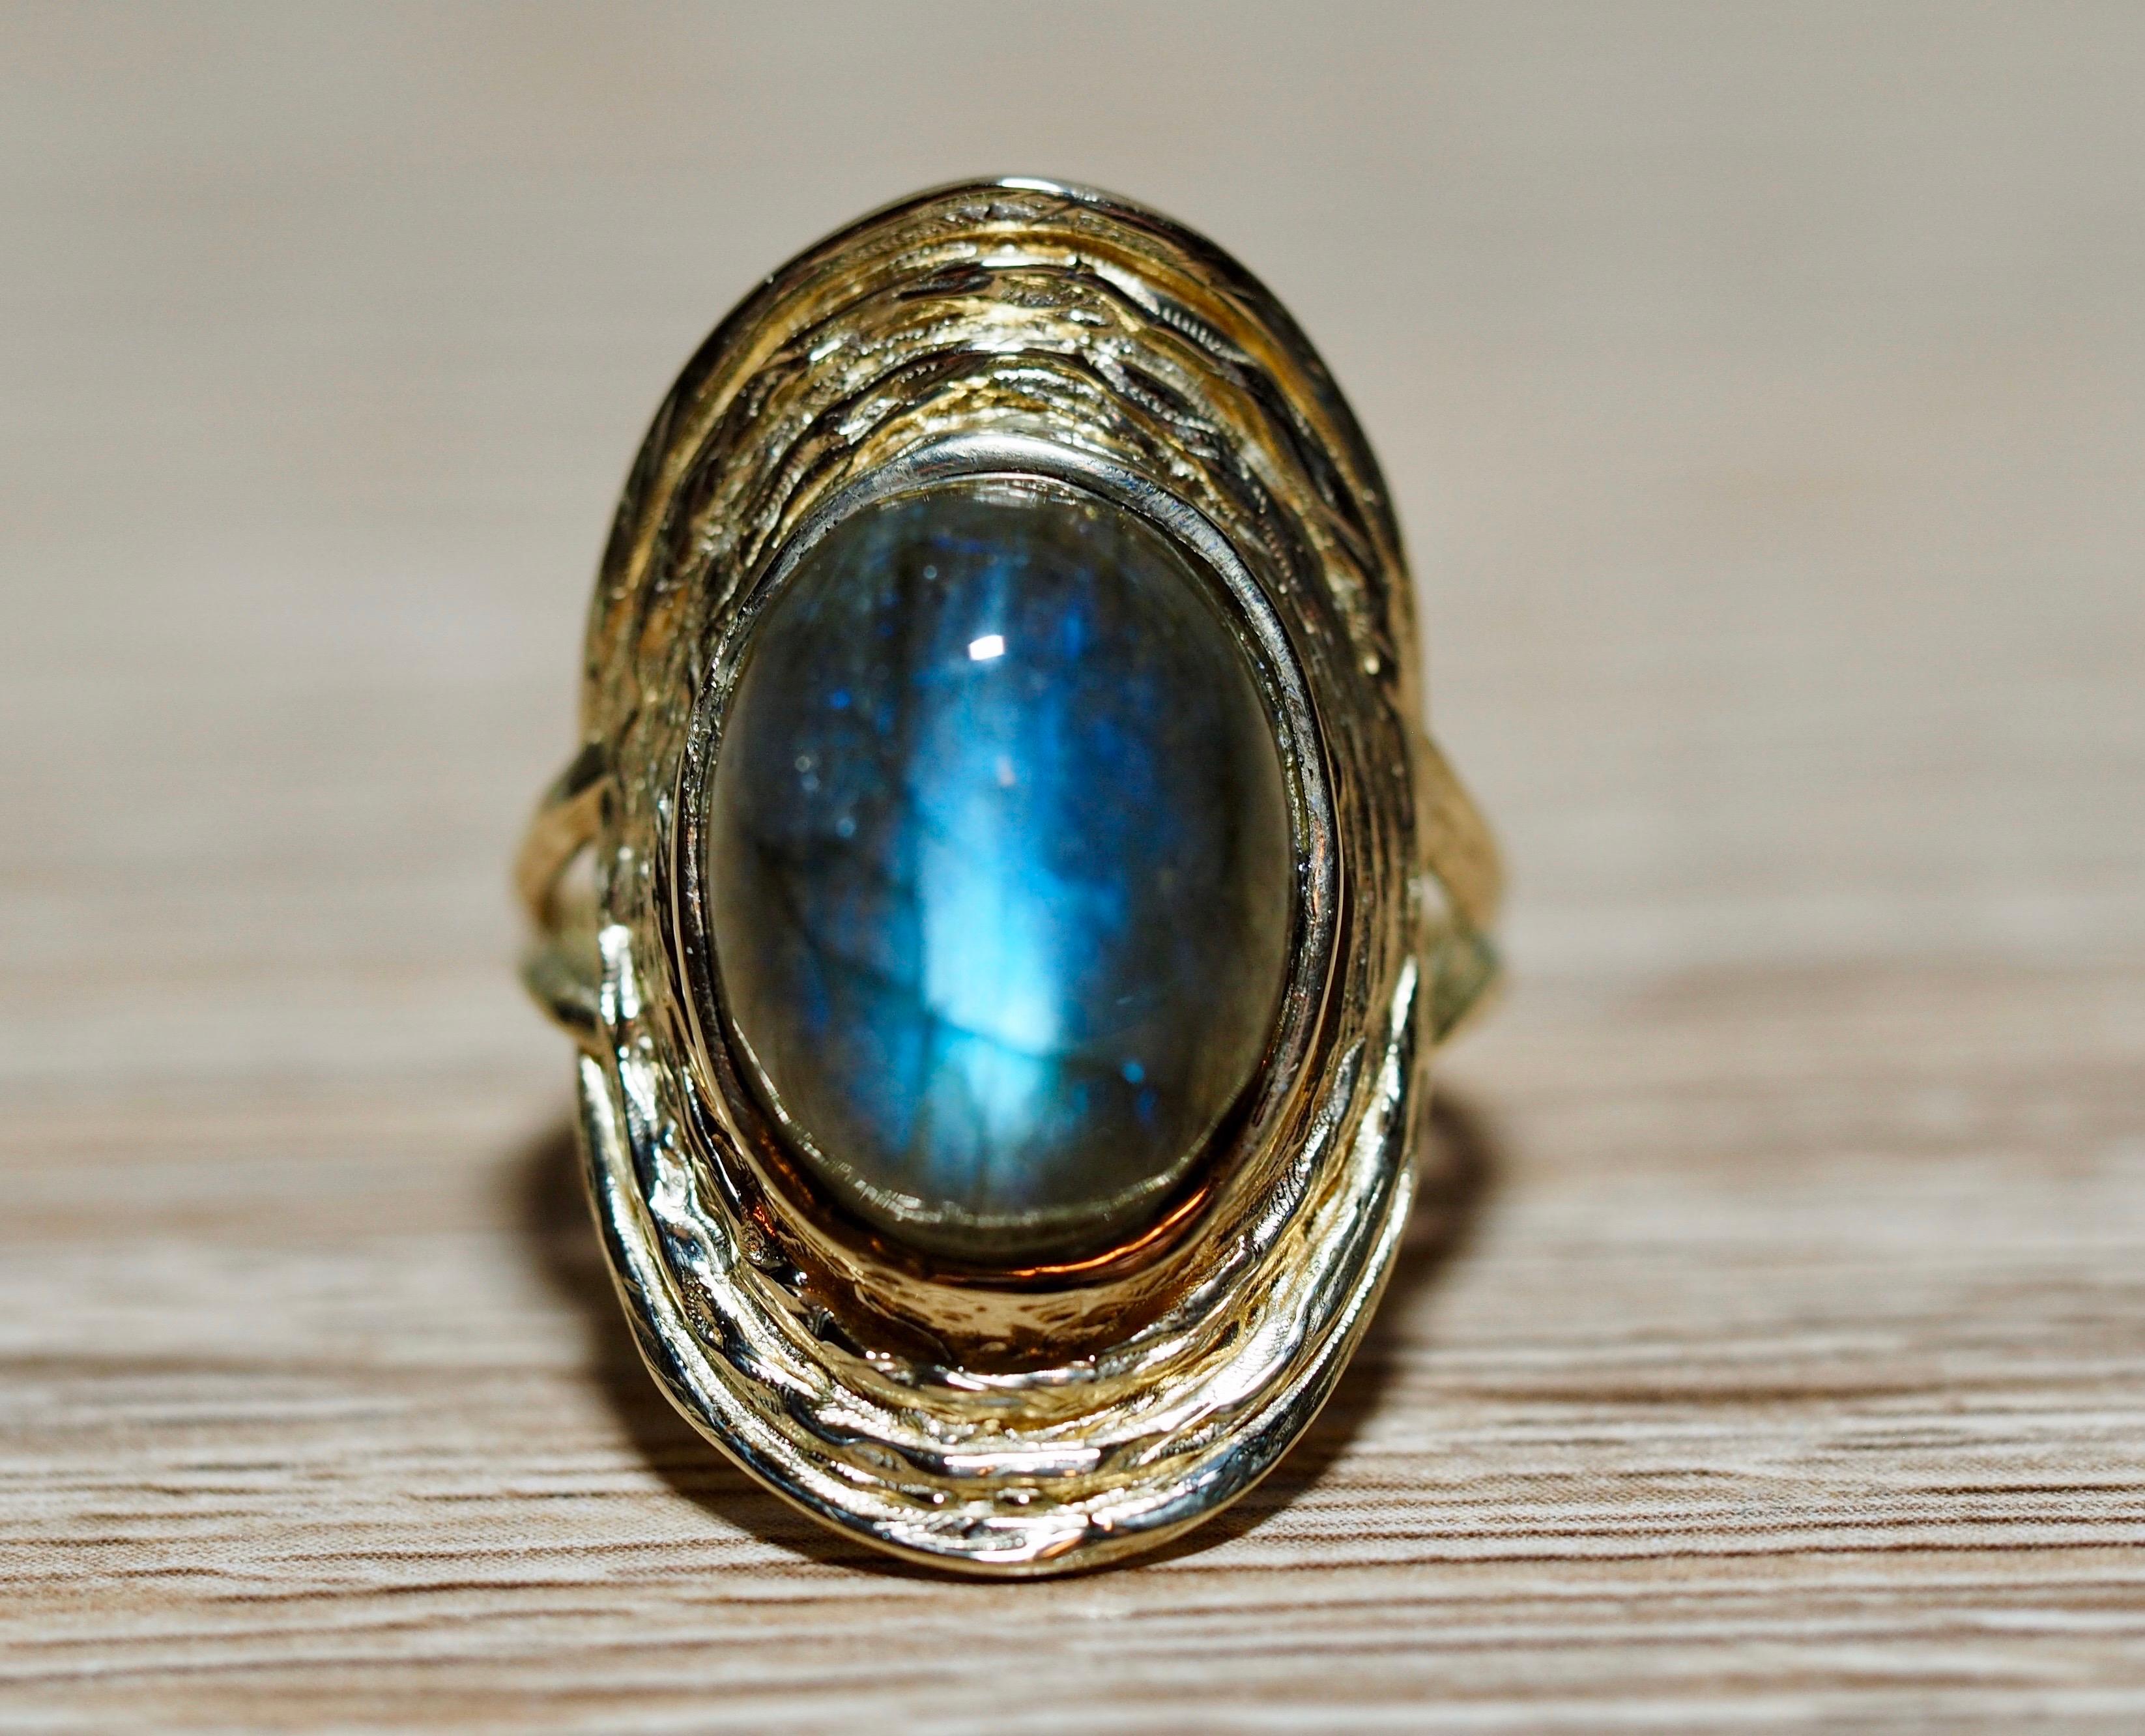 Vintage 14- Karat yellow gold ring is glowing with a 9.10 carat labradorite cabochon  oval center. The majestic center is glowing in hues of blues and soft touches of purple that glisten as it touches the light. It is bezel set in a frame of 14